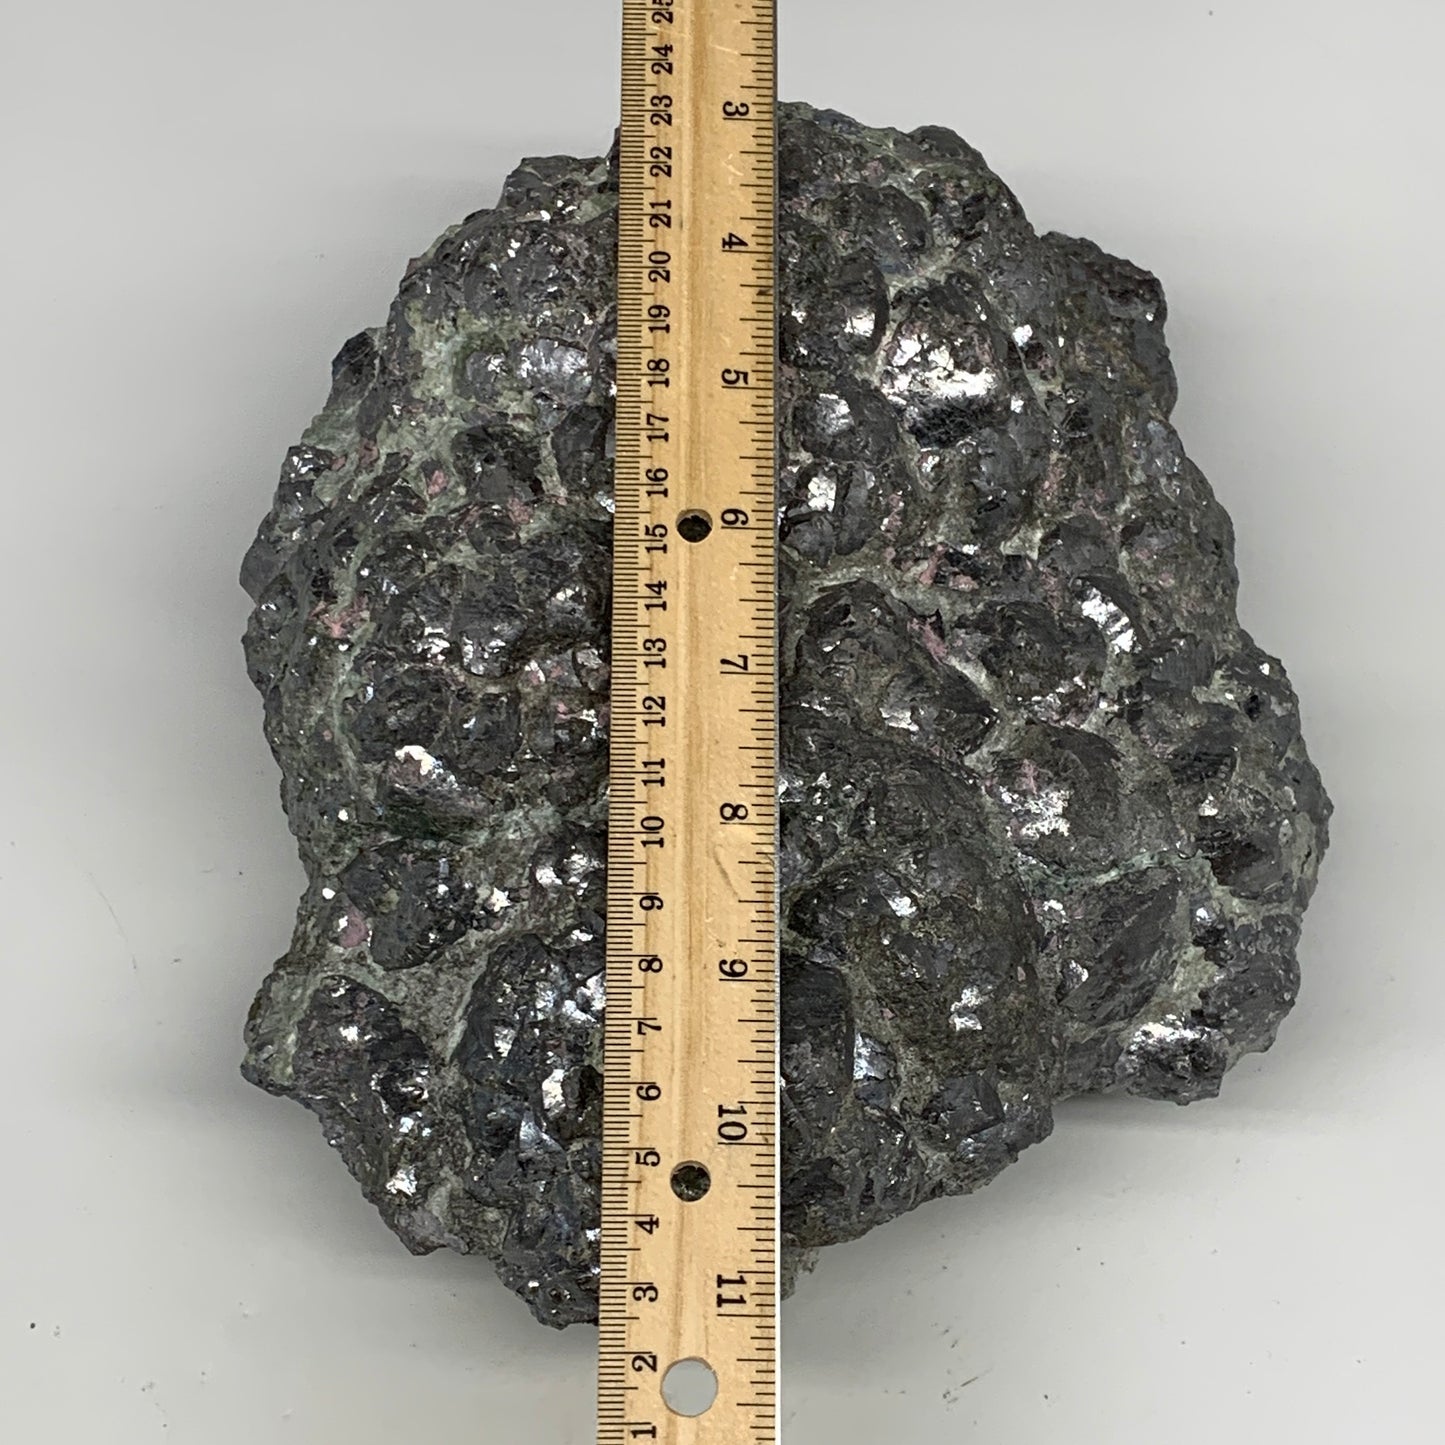 32.12Lbs, 10.5"x8"x5.5" Rough Skutterudite Mineral Crystal @Morocco, B109